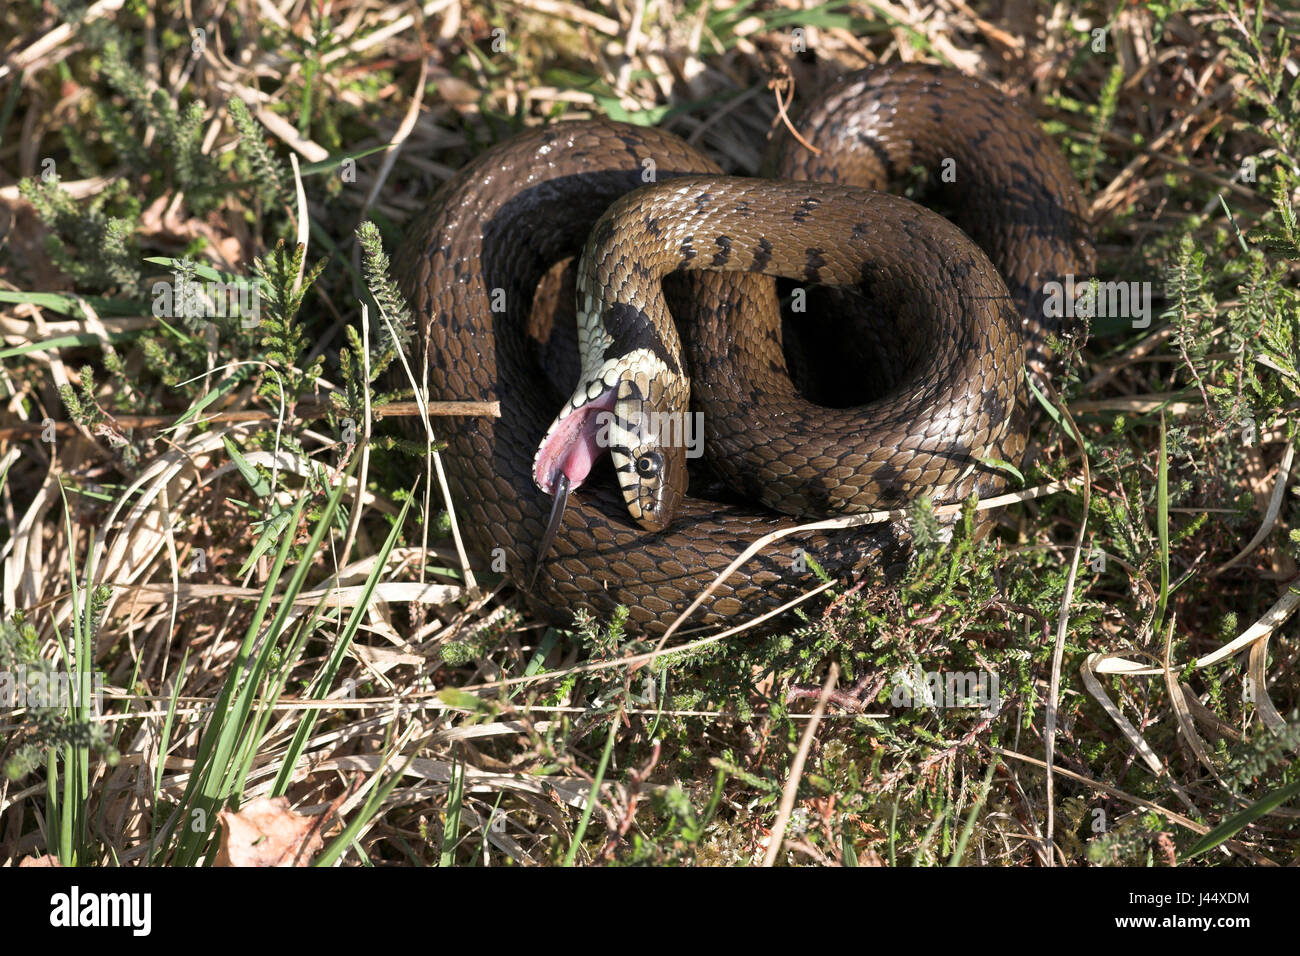 a grass snake plays death as a defence Stock Photo